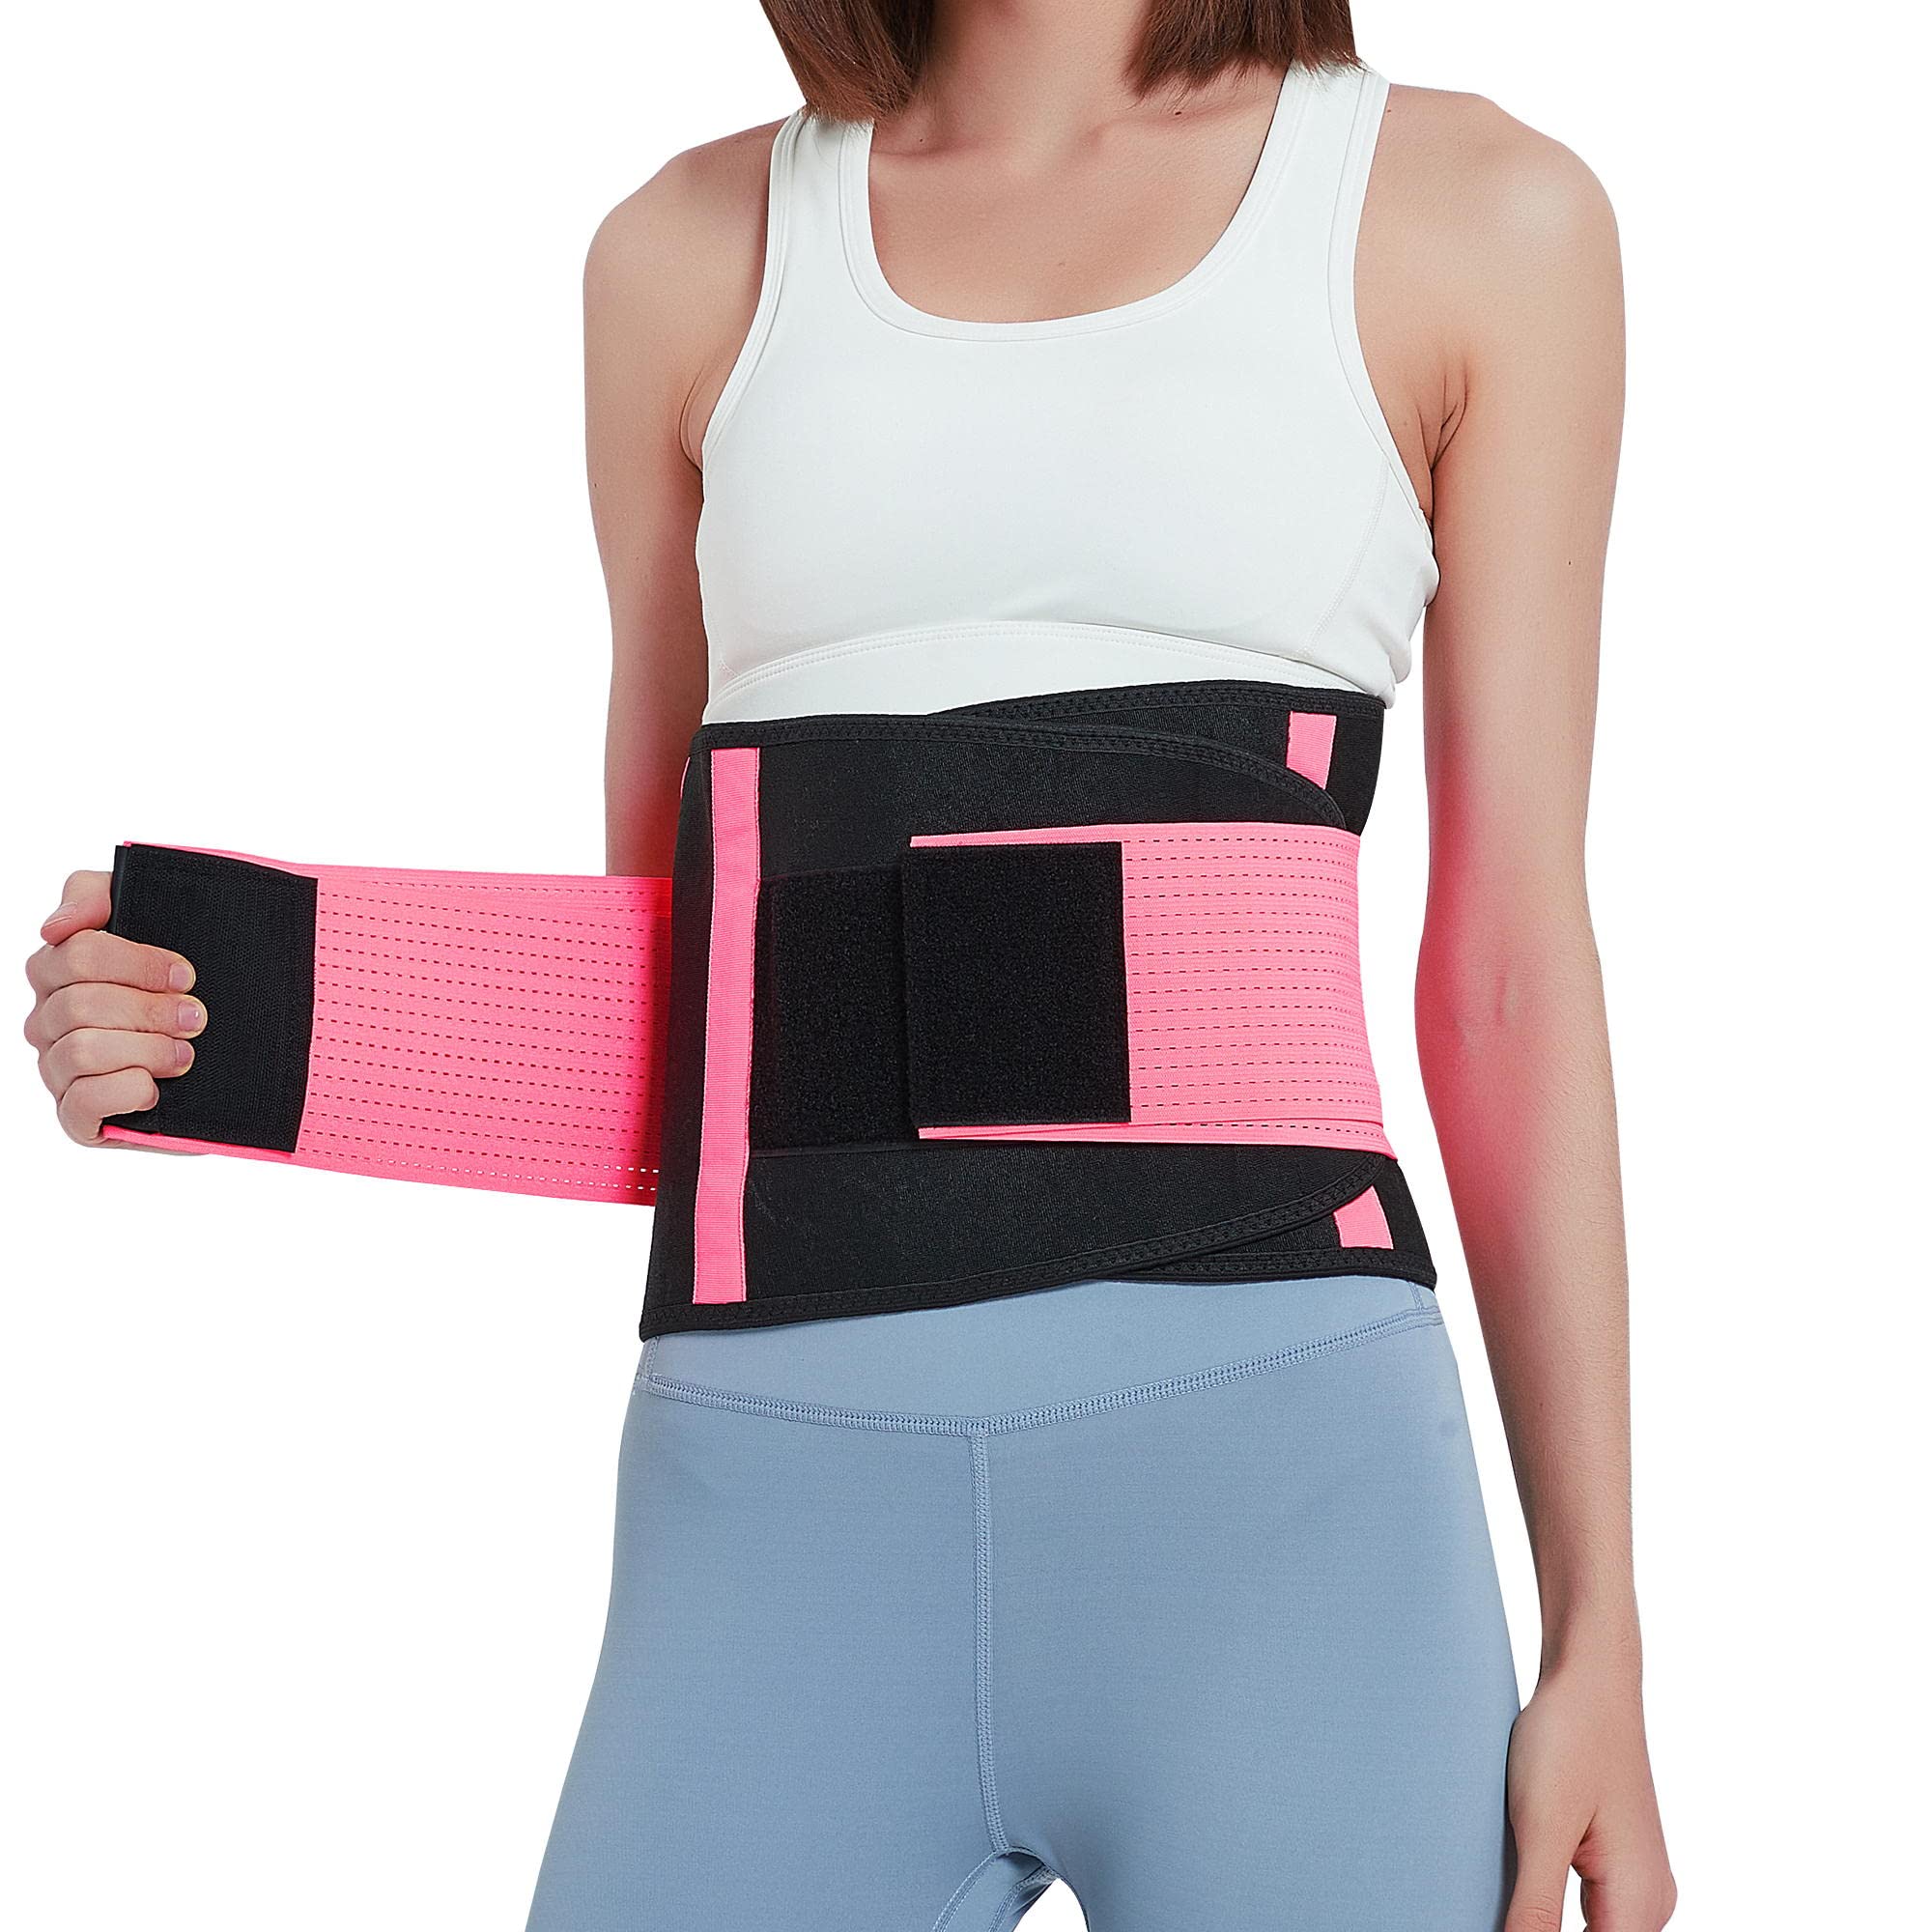 Qlwfov Back Support Belt for Women Lower Back Brace for Pain Relief Back  Brace for Herniated Disc and Sciatica back brace for lower back pain women-Size  Large(Waist 28''-32'') Large Pink